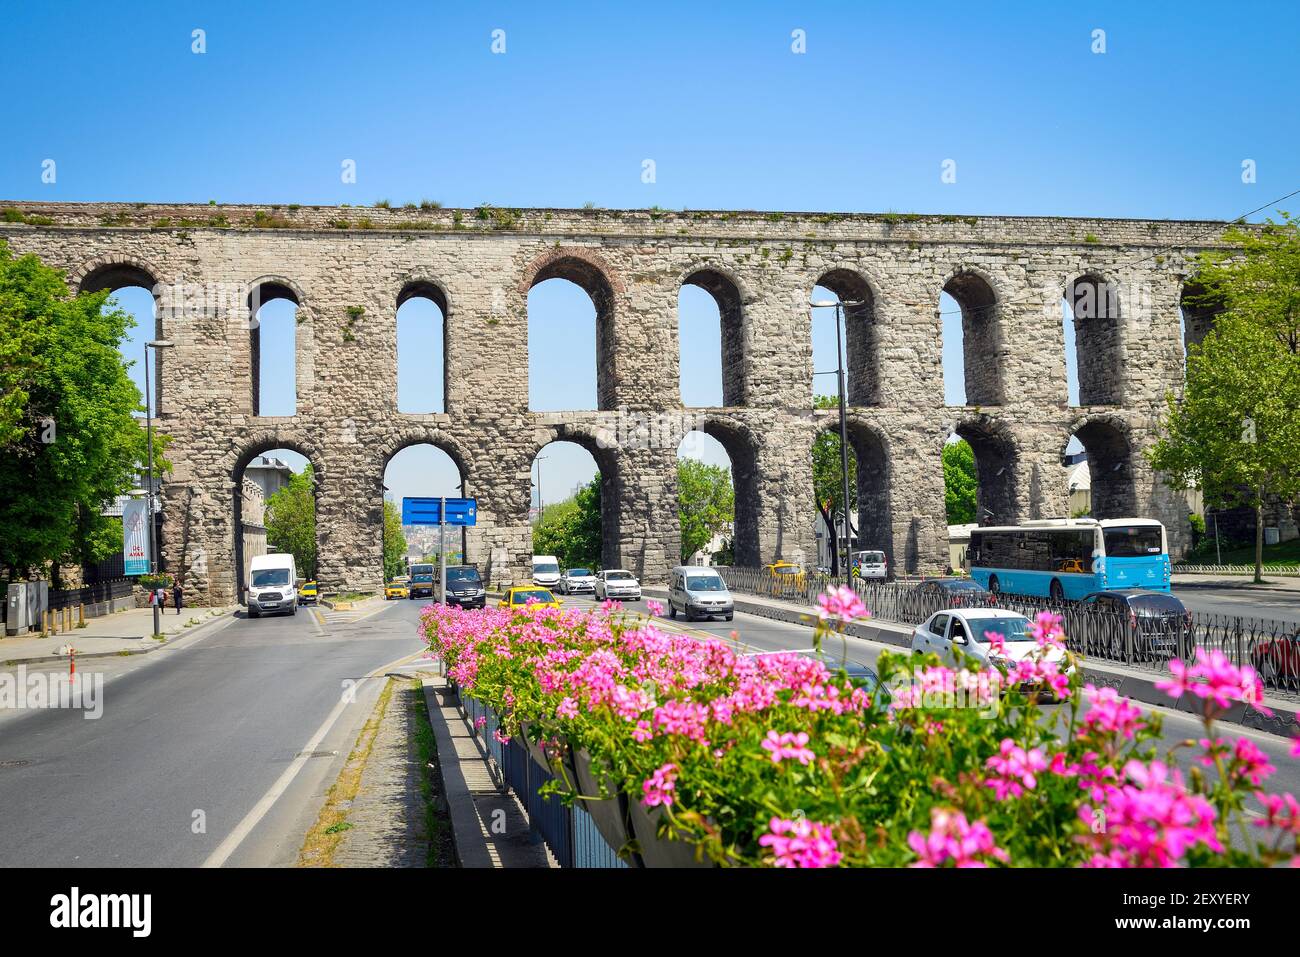 Istanbul, Turkey - May 7, 2017: The Valens Aqueduct  is a Roman aqueduct which was the major water-providing system of the Eastern Roman capital of Co Stock Photo